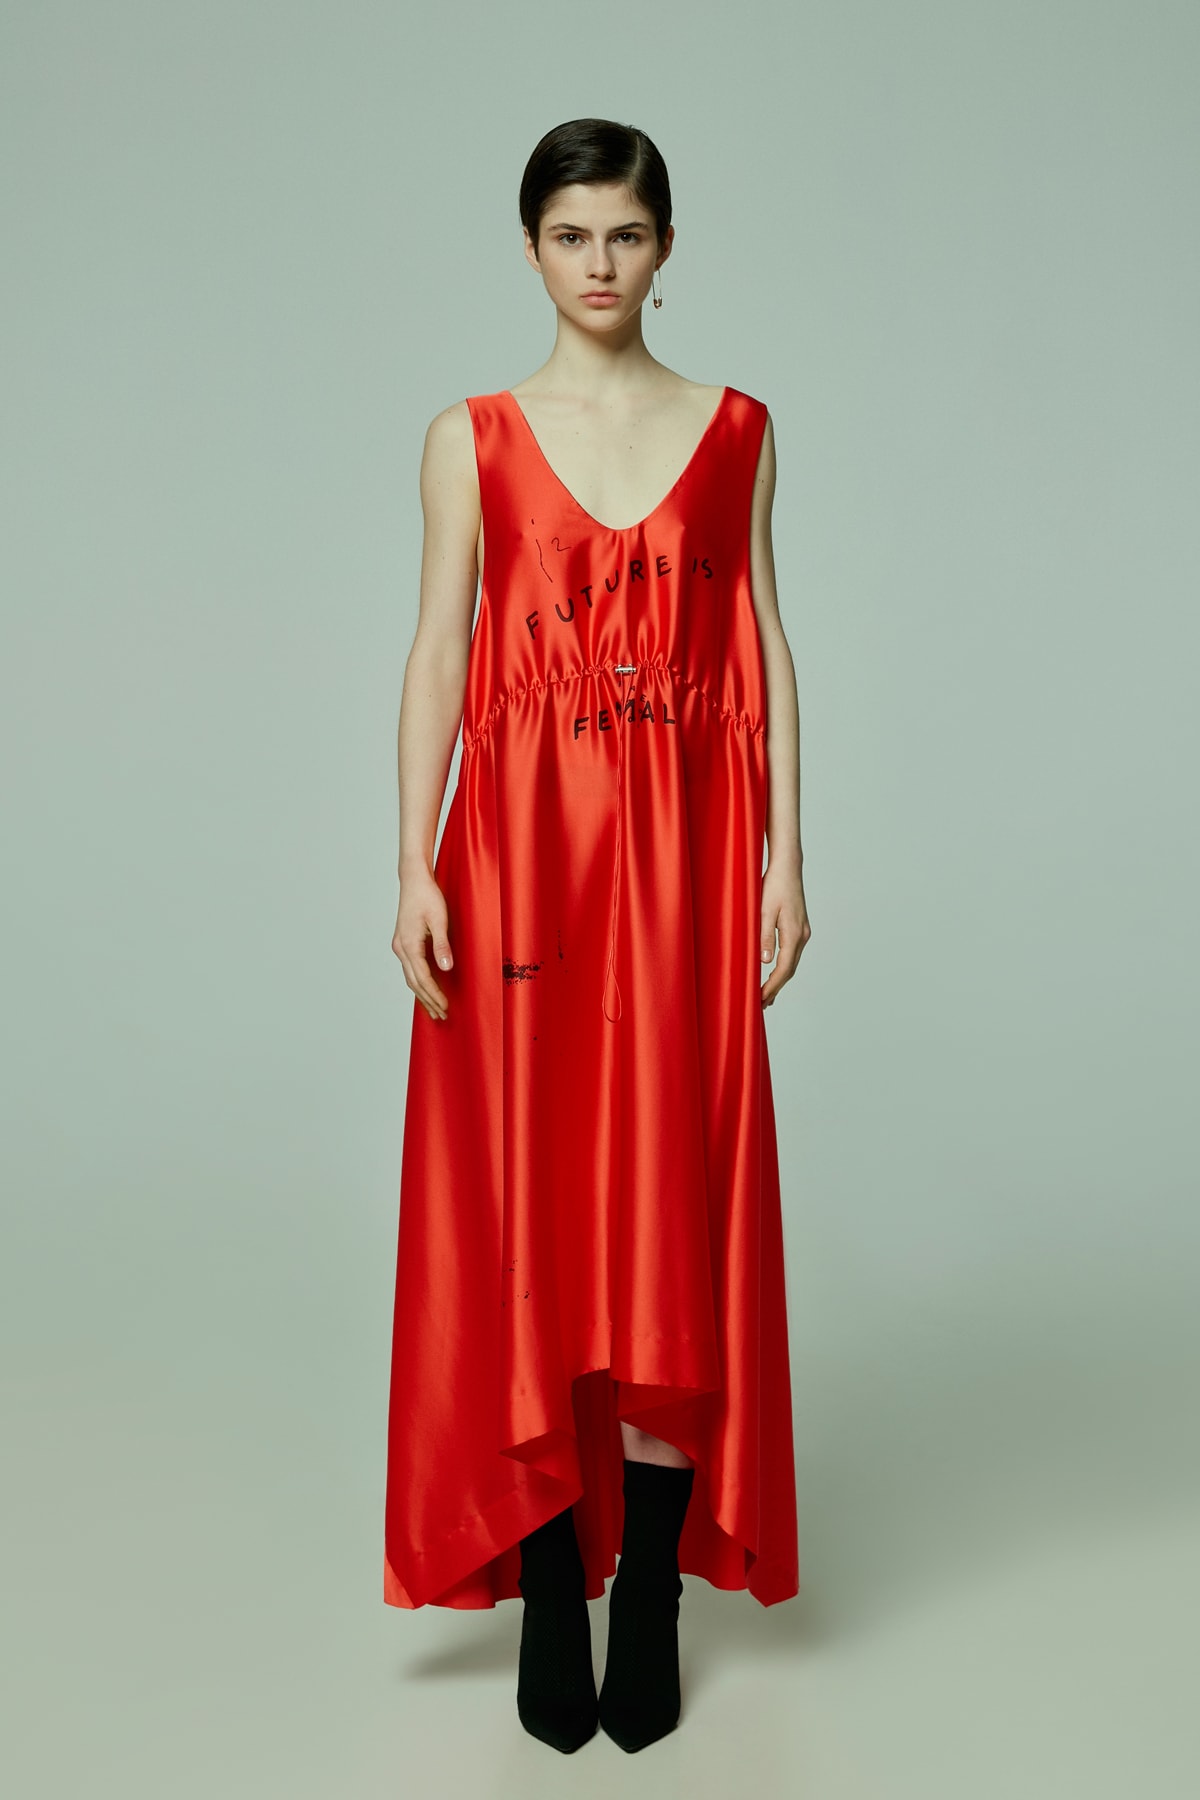 TATTOOSWEATERS Fall Winter 2018 Collection Lookbook Silk Dress Red